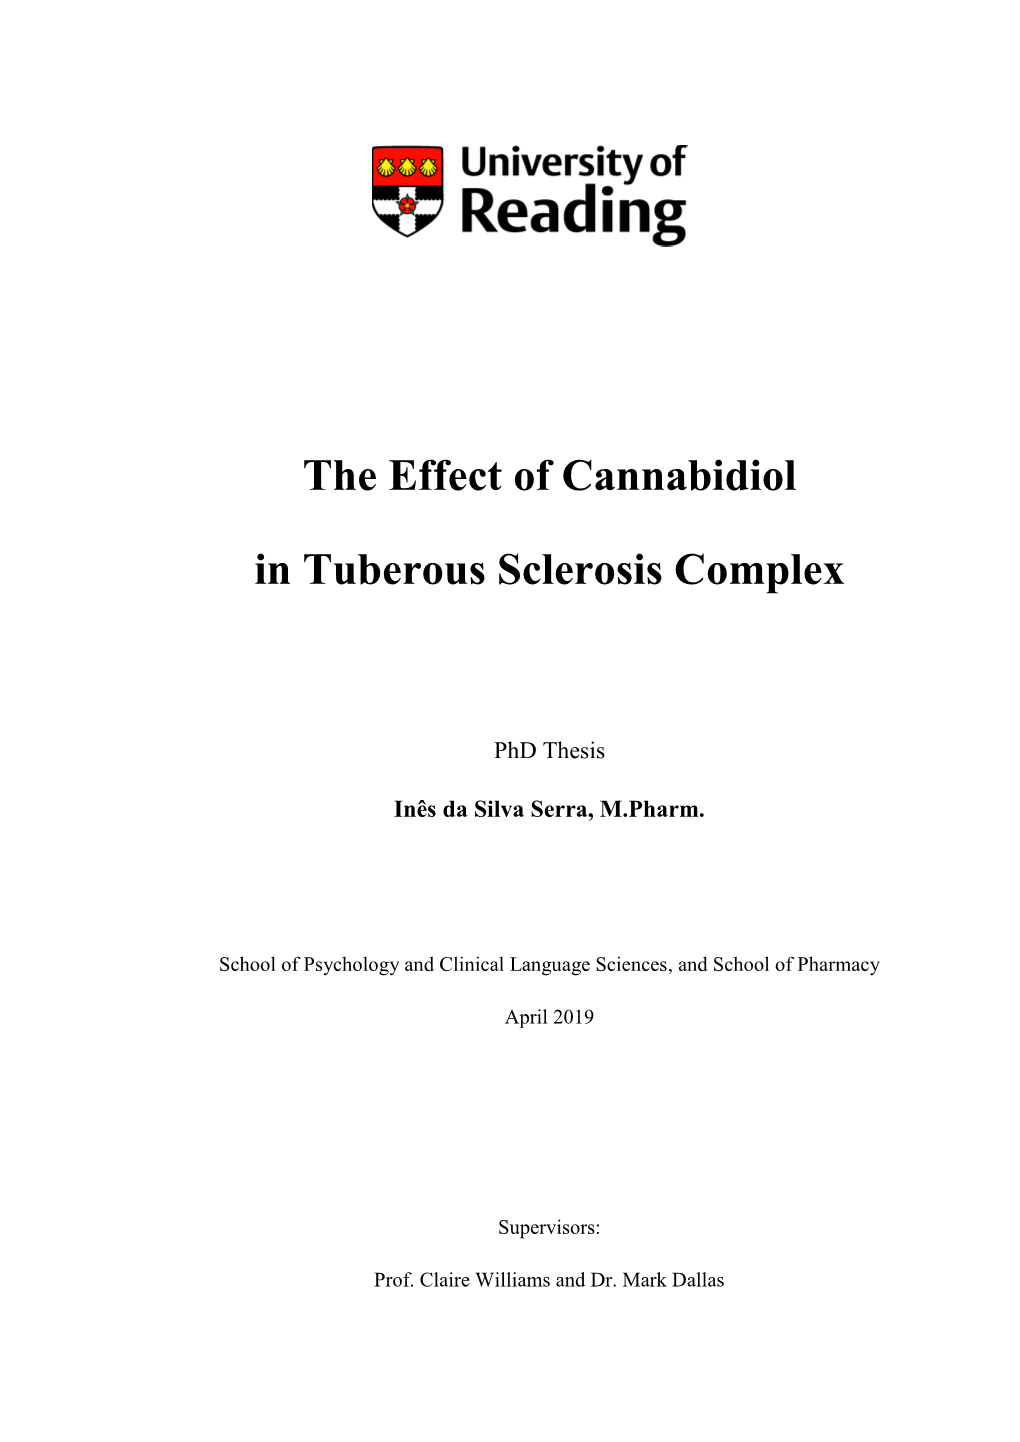 The Effect of Cannabidiol in Tuberous Sclerosis Complex